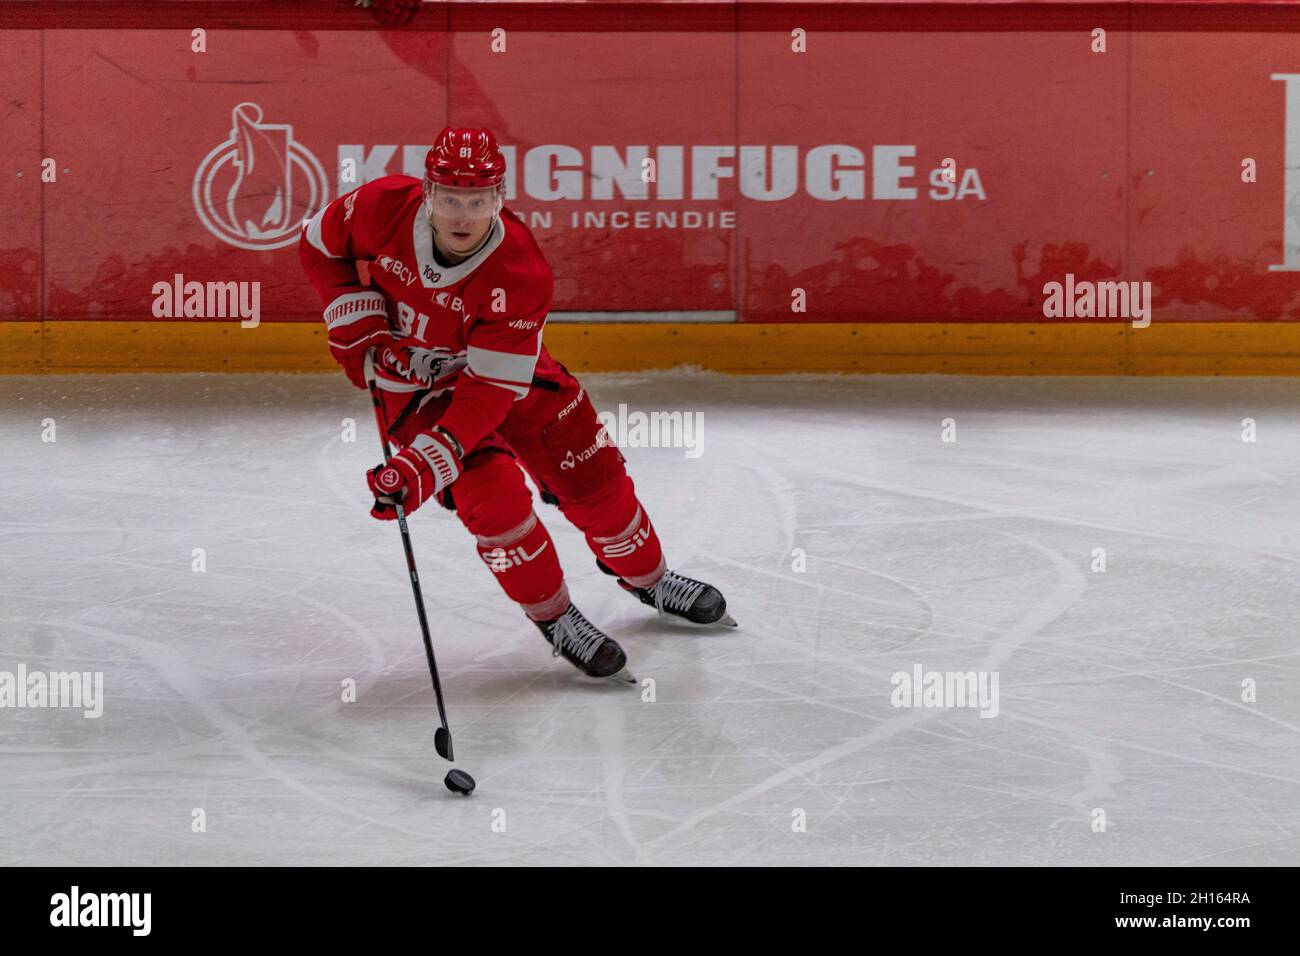 Lausanne, Switzerland. 10th June, 2021. Ronalds Kennis of Lausanne Hc is in  action during the 16th match of the 2021-2022 Swiss National League Season  with the Lausanne Hc and SCL Tigers (Photo